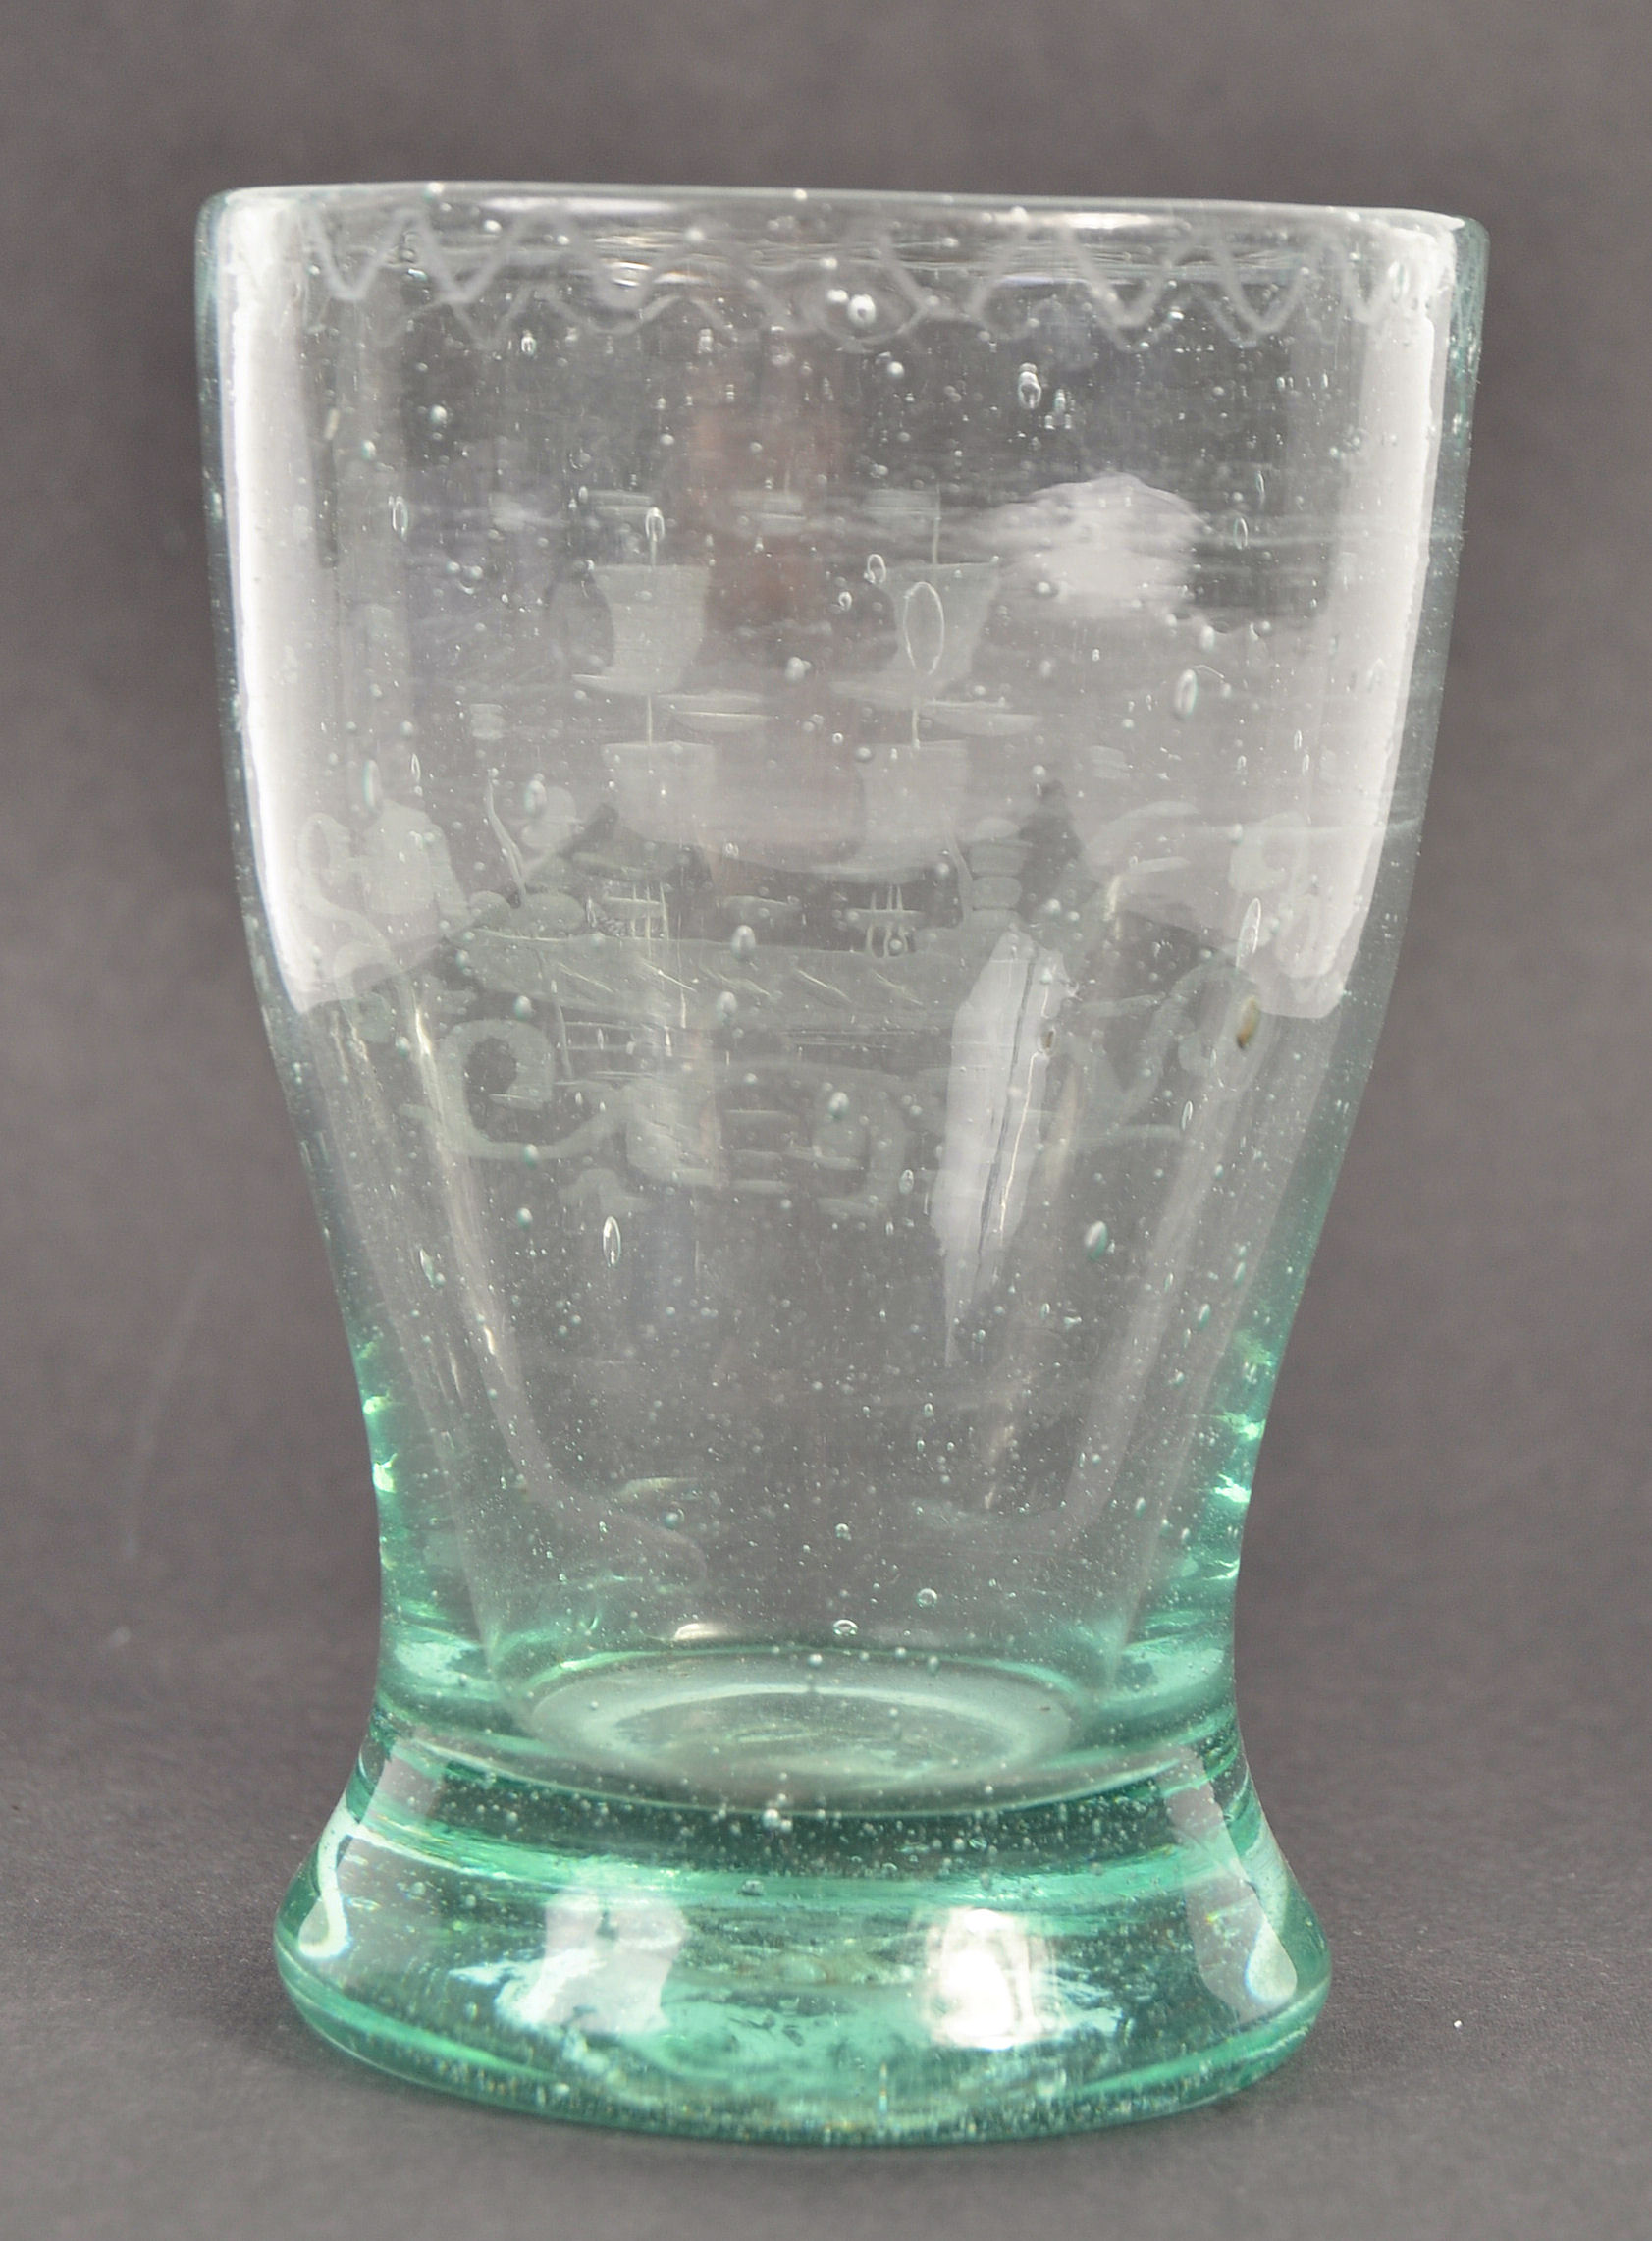 18TH CENTURY GEORGIAN ENGLISH DRINKING GLASS WITH BOAT DECORATION - Image 2 of 5